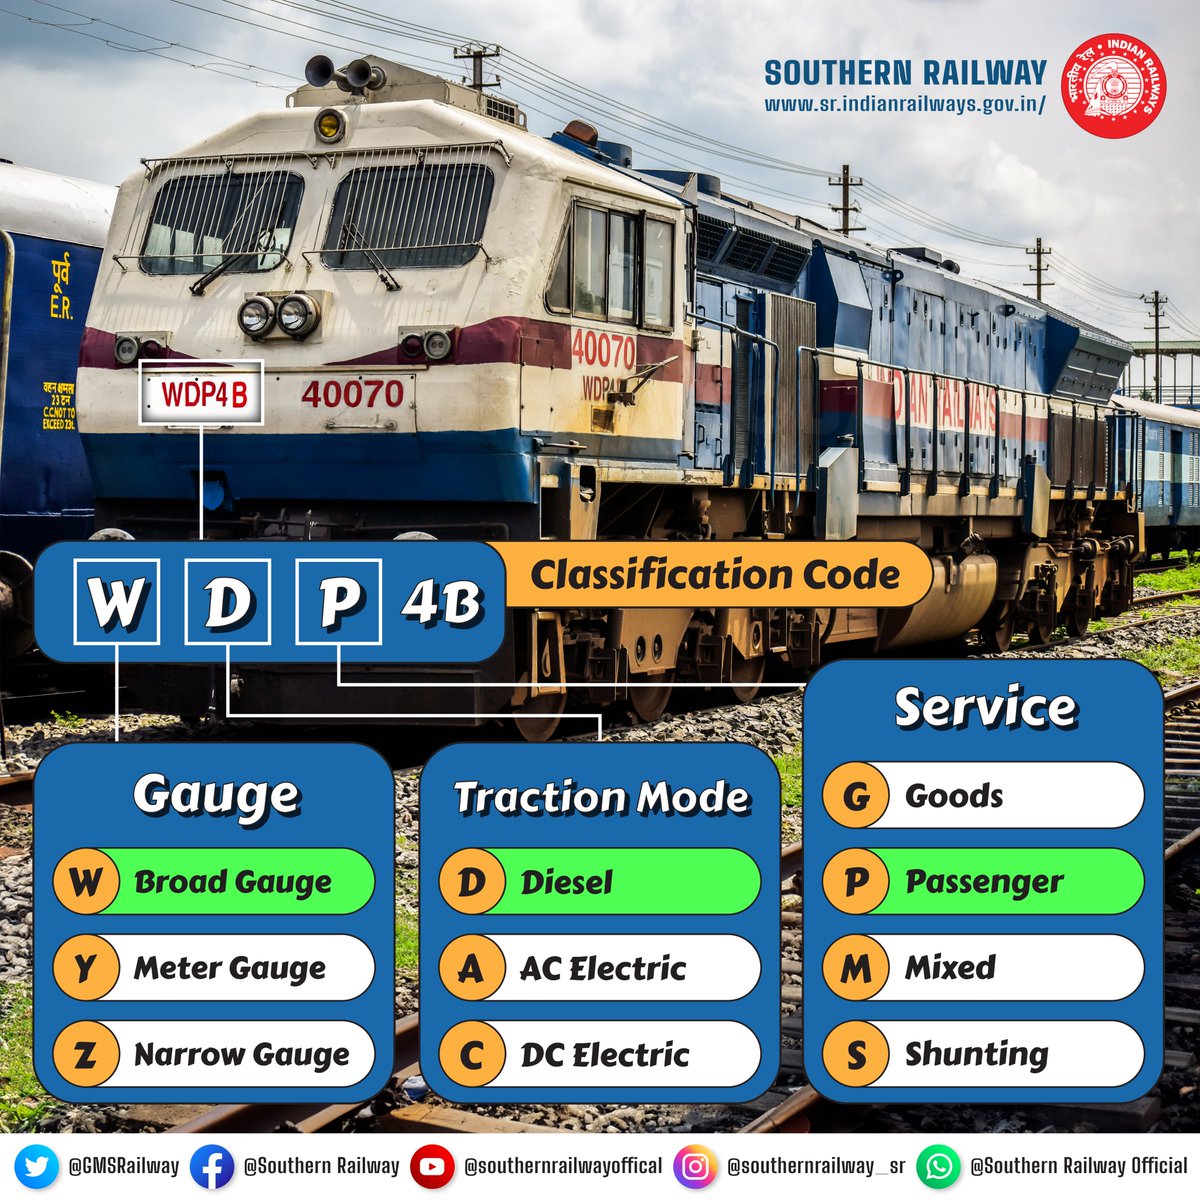 Let's crack the code and unlock the secrets behind this powerful machine! 

Each letter holds a key detail about this workhorse of the #IndianRailways.

#TrainMystery #WDP4B #Decoding #SouthernRailway #KnowYourLocomotive